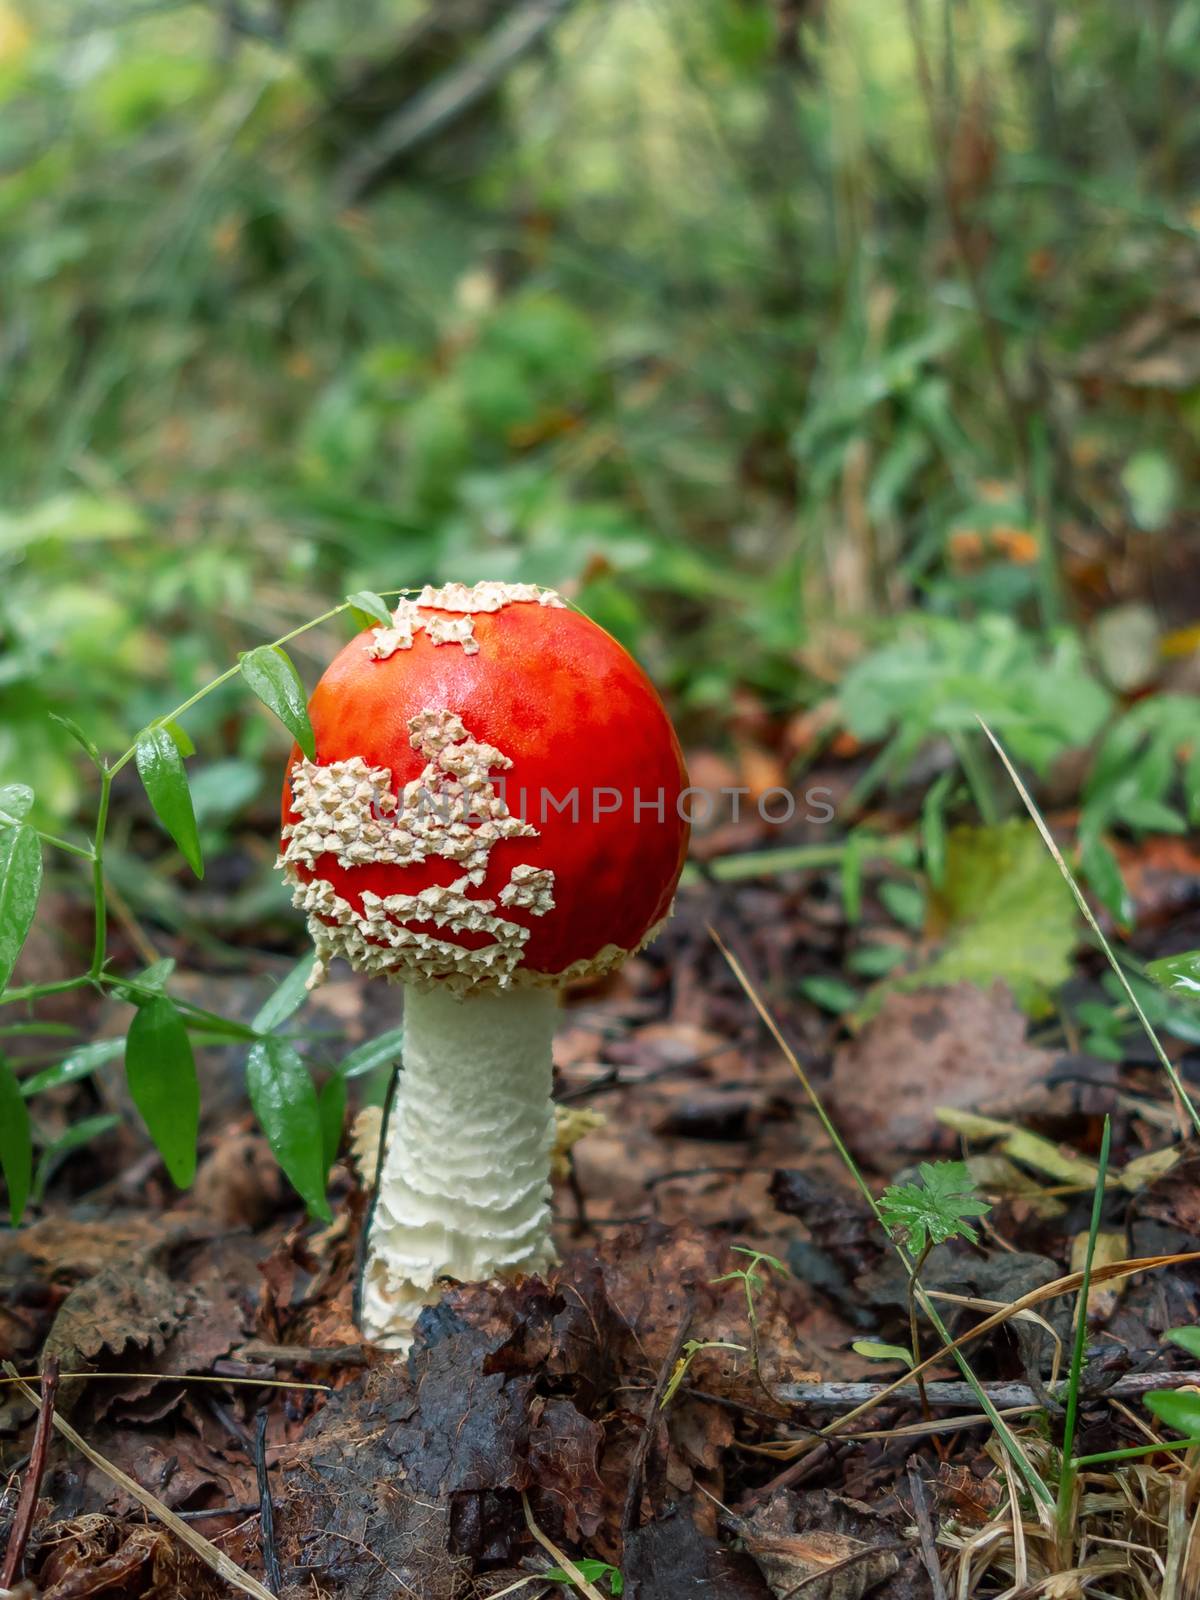 Small mushroom amanita known as fly agaric grows in the forest - vertical image by galsand